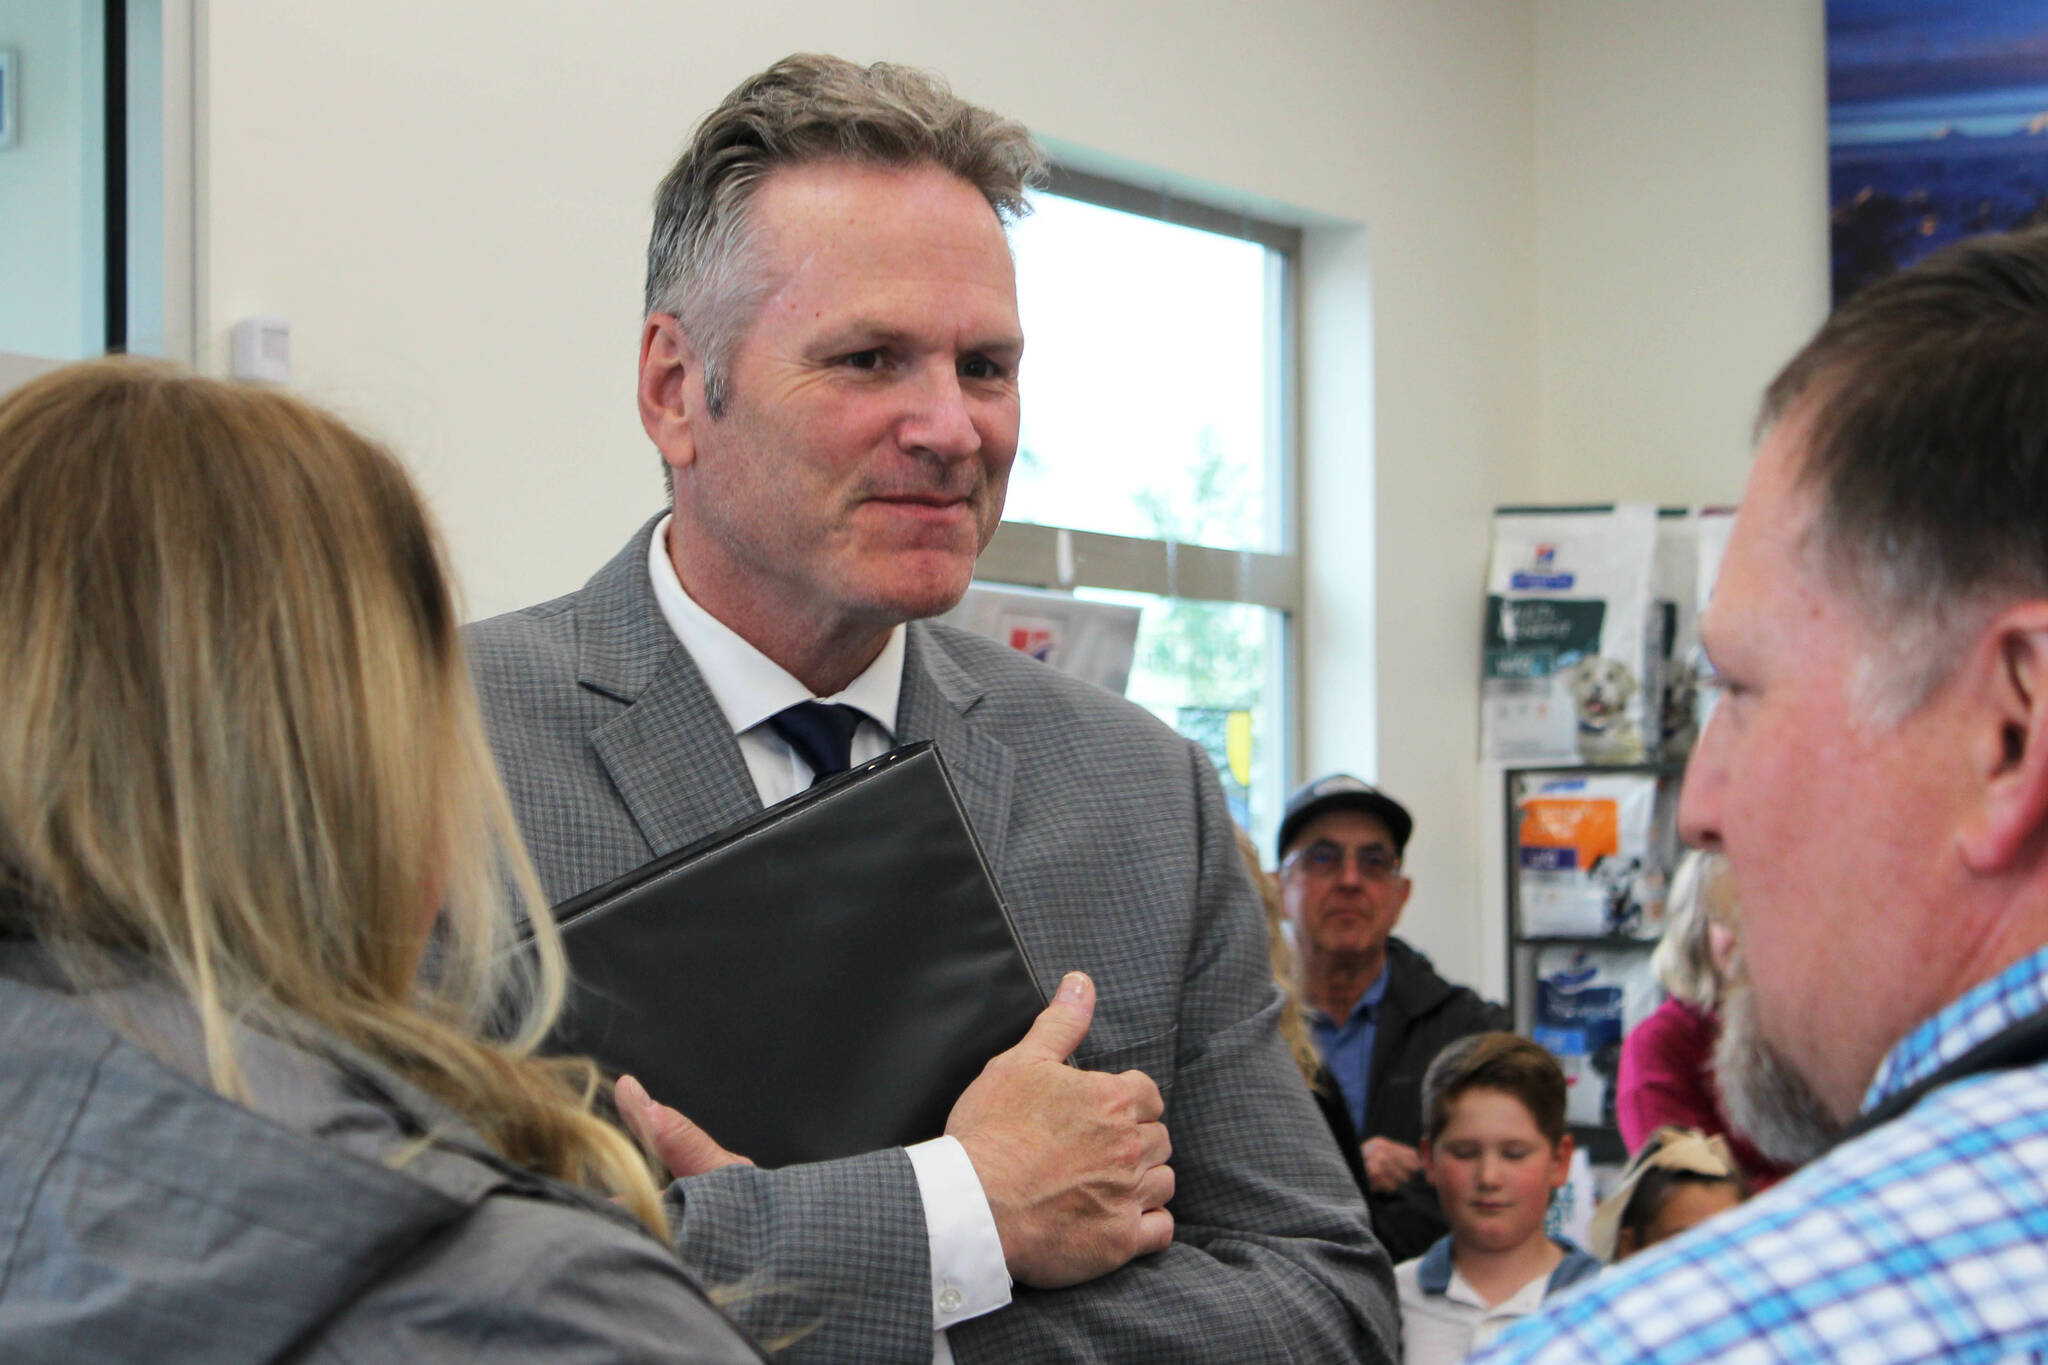 Gov. Mike Dunleavy prepares to deliver opening remarks at a bill signing event at Twin Cities Veterinary Clinic on Thursday, July 6, 2023 in Soldotna, Alaska. (Ashlyn O’Hara/Peninsula Clarion)